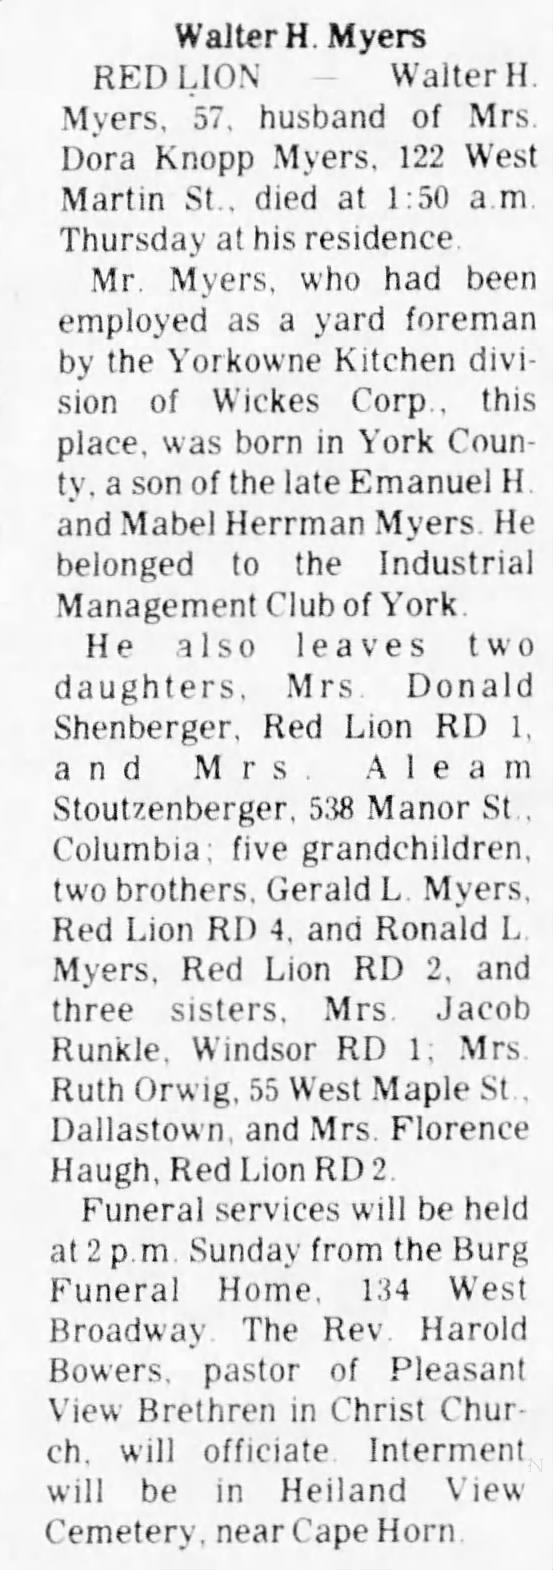 1976 Death Walter H Myers of Red Lion